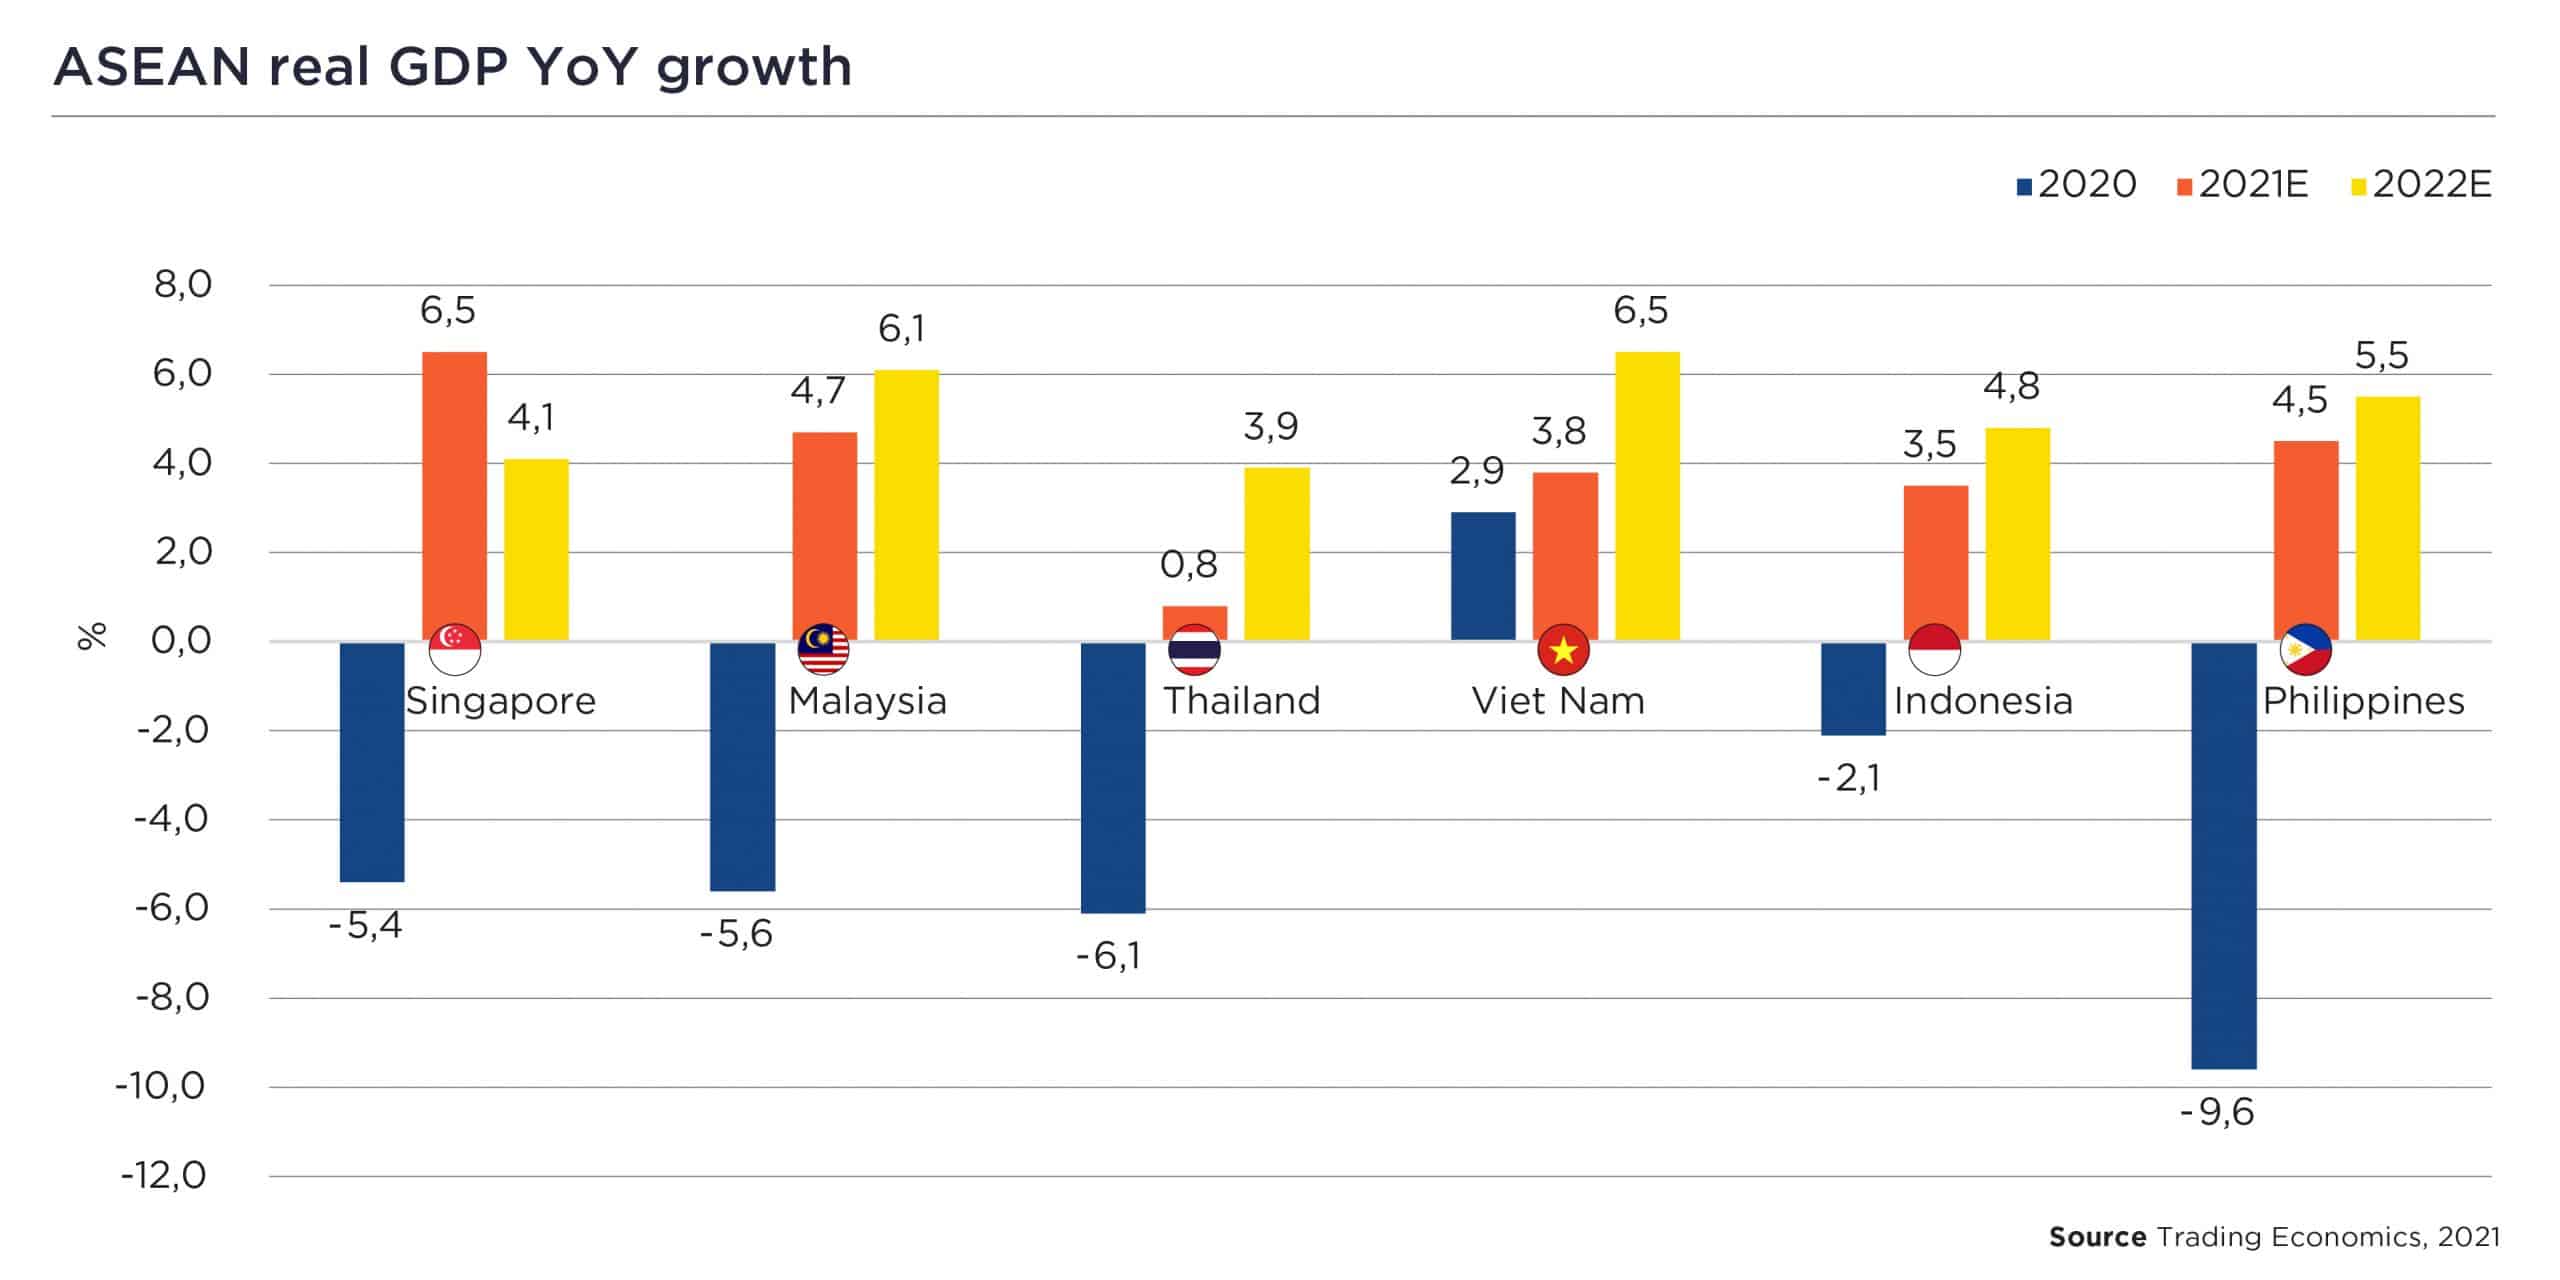 ASEAN real GDP YoY growth